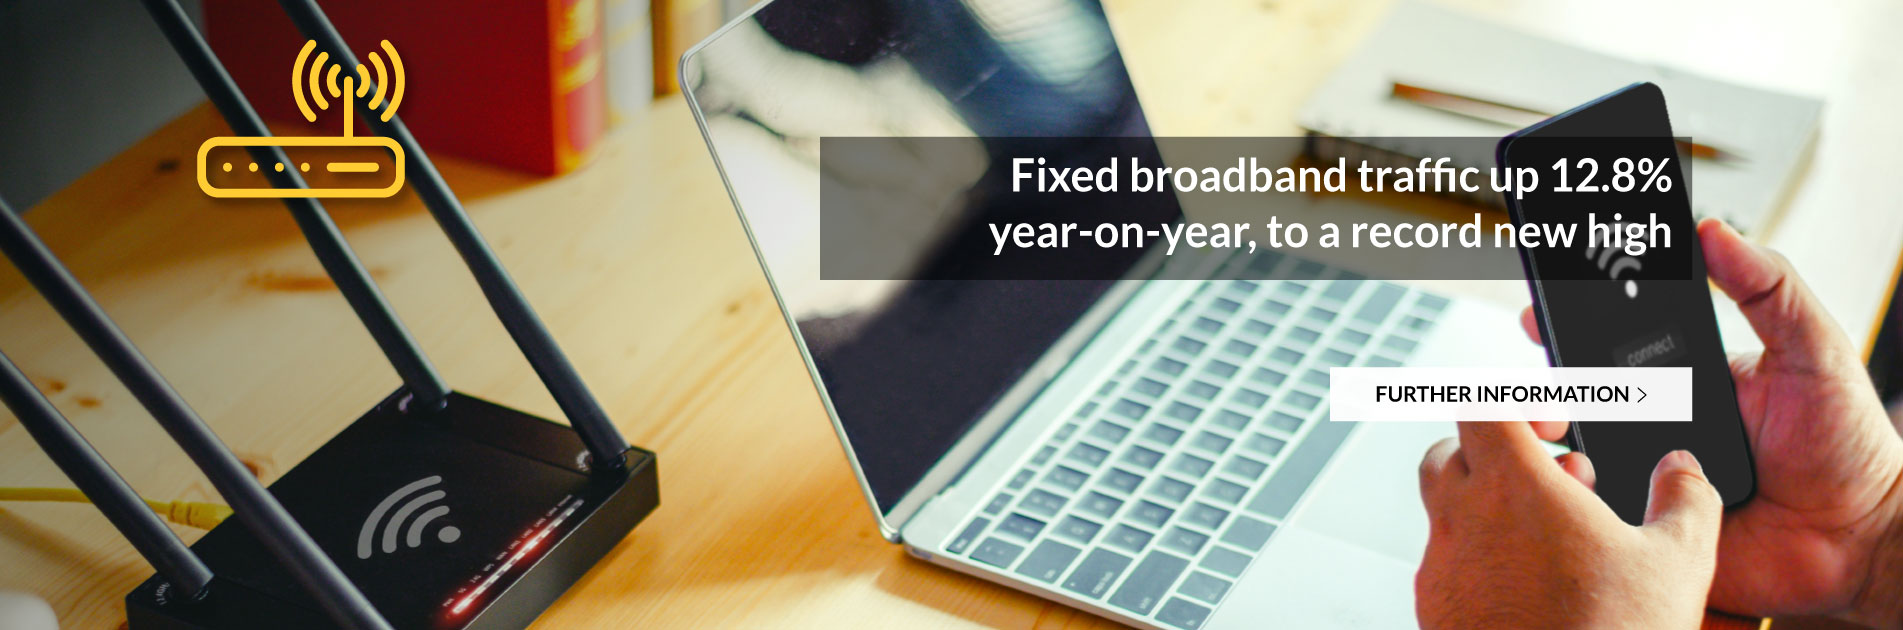 Fixed broadband traffic up 12.8% year-on-year, to a record new high